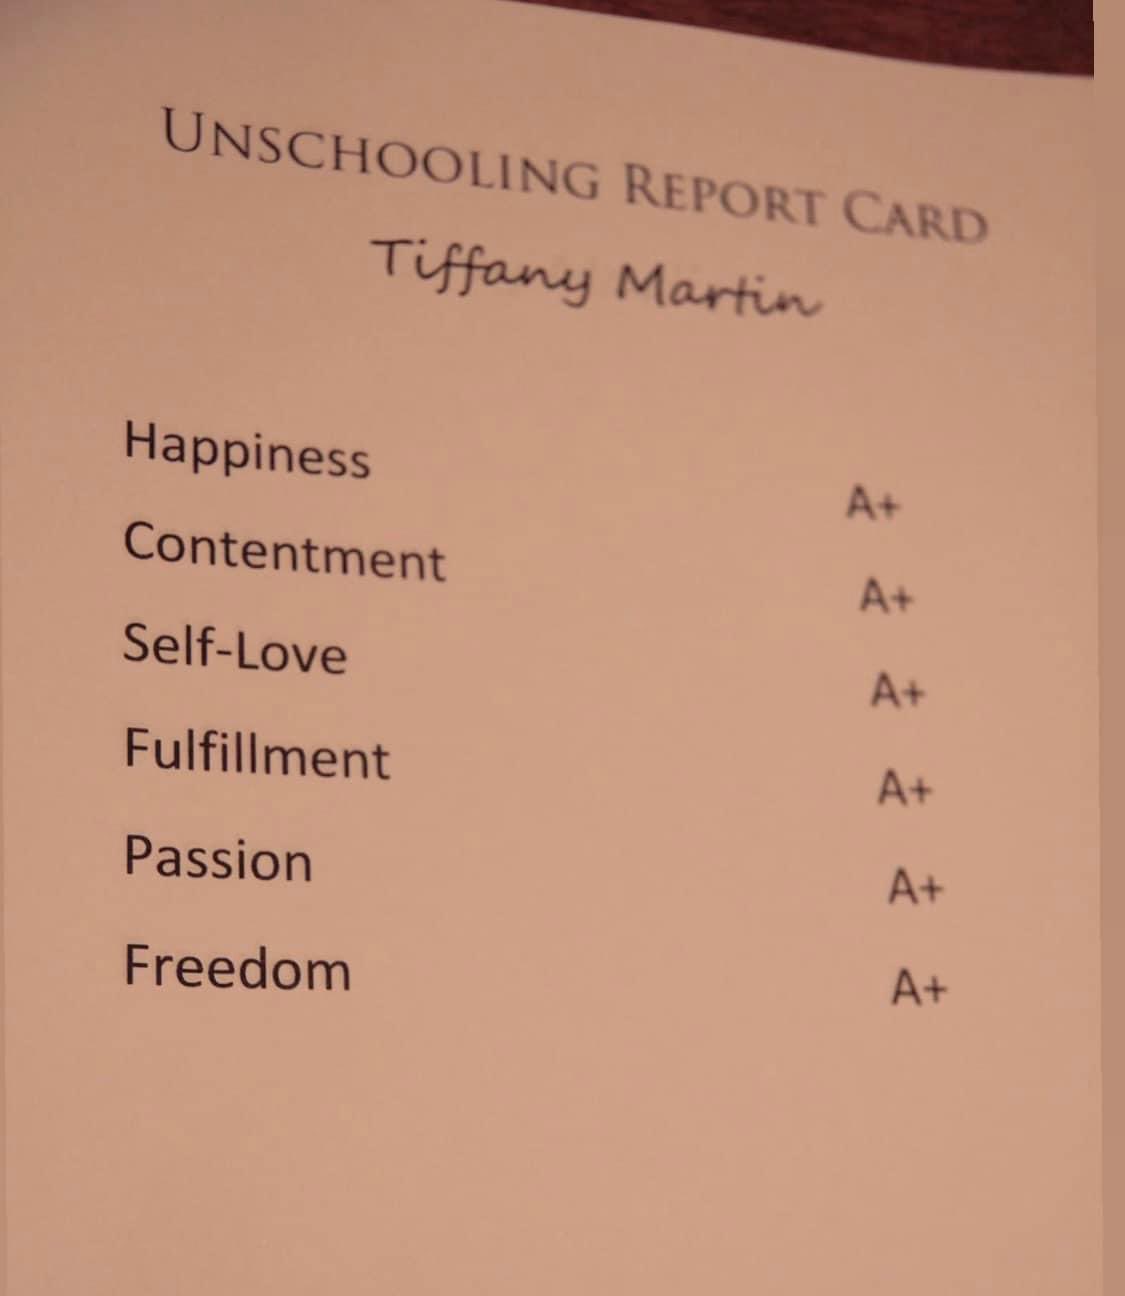 document - Unschooling Report Card Tiffany Martin Happiness Contentment SelfLove Fulfillment Passion Freedom